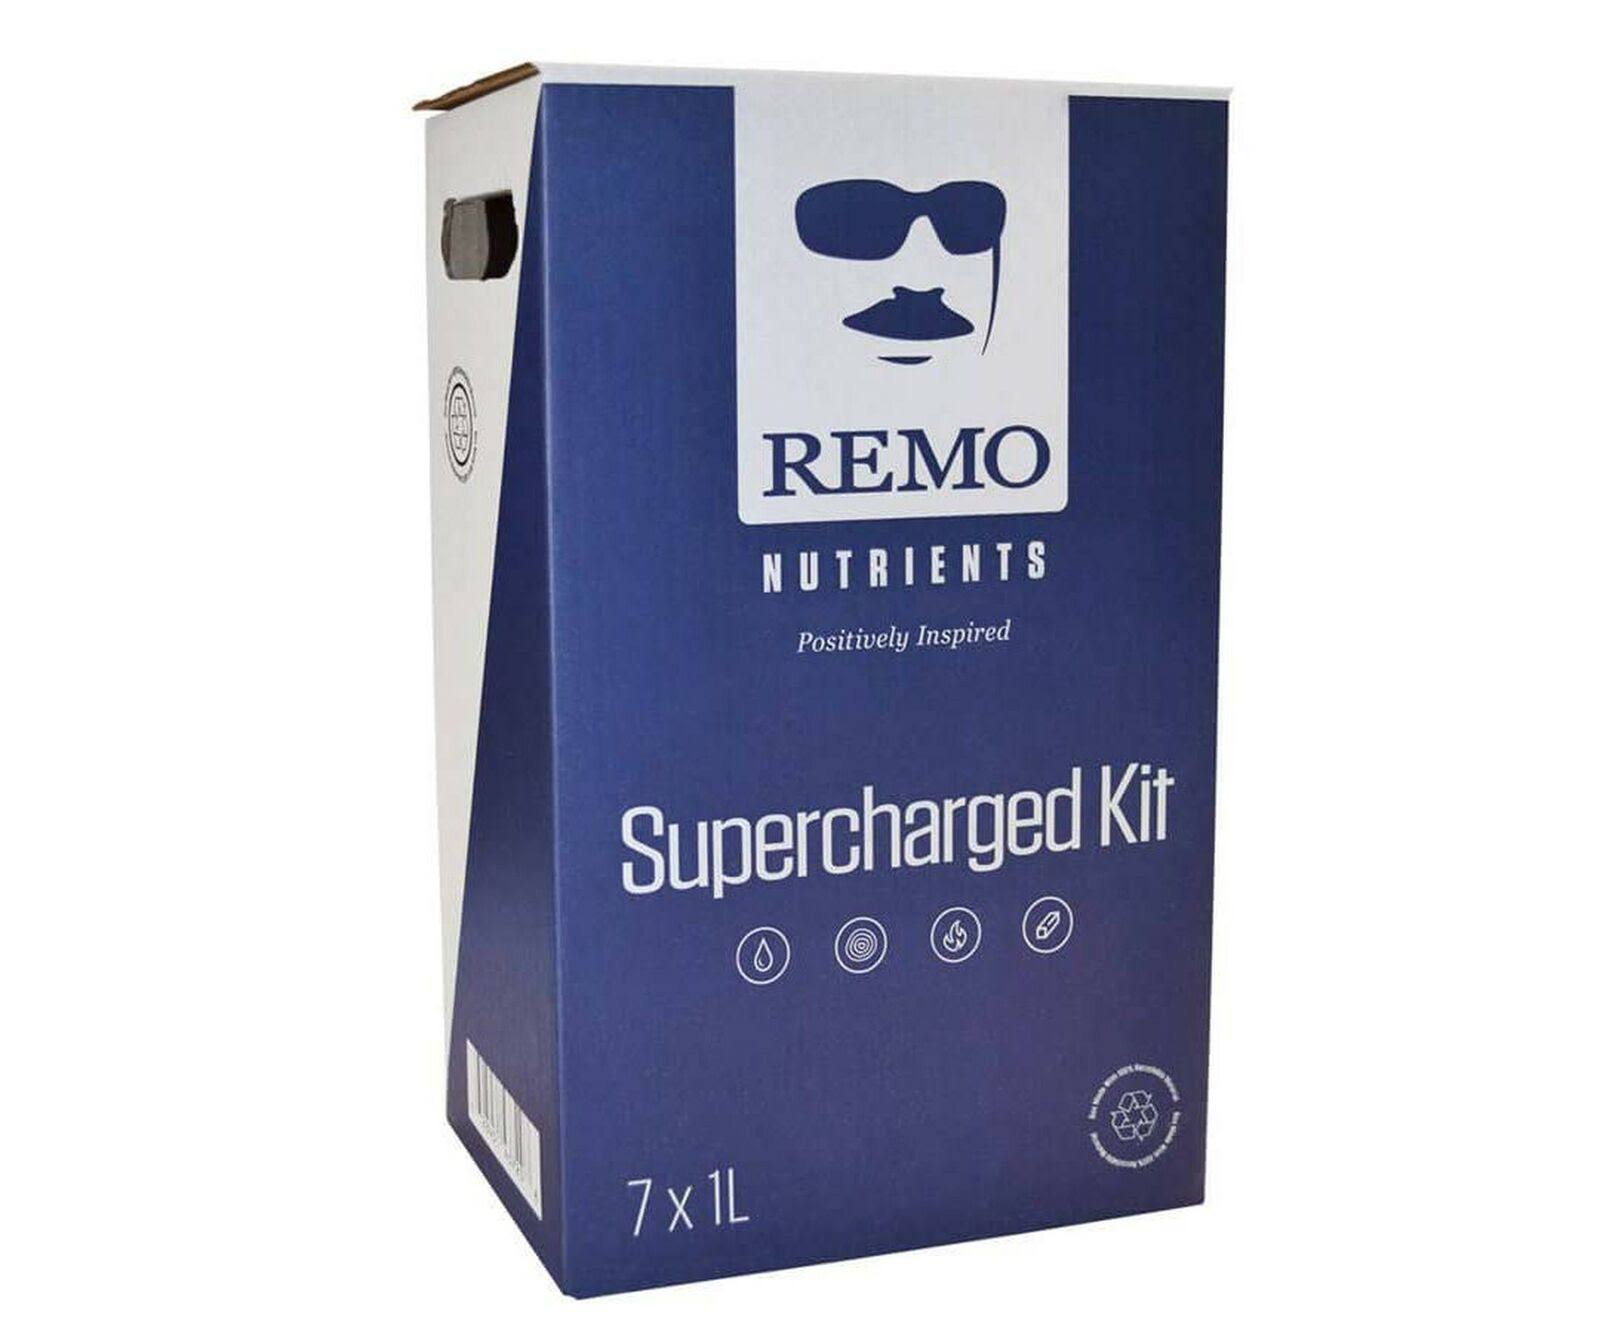 Remo Nutrients Remo's 1 Liter Supercharged Kit